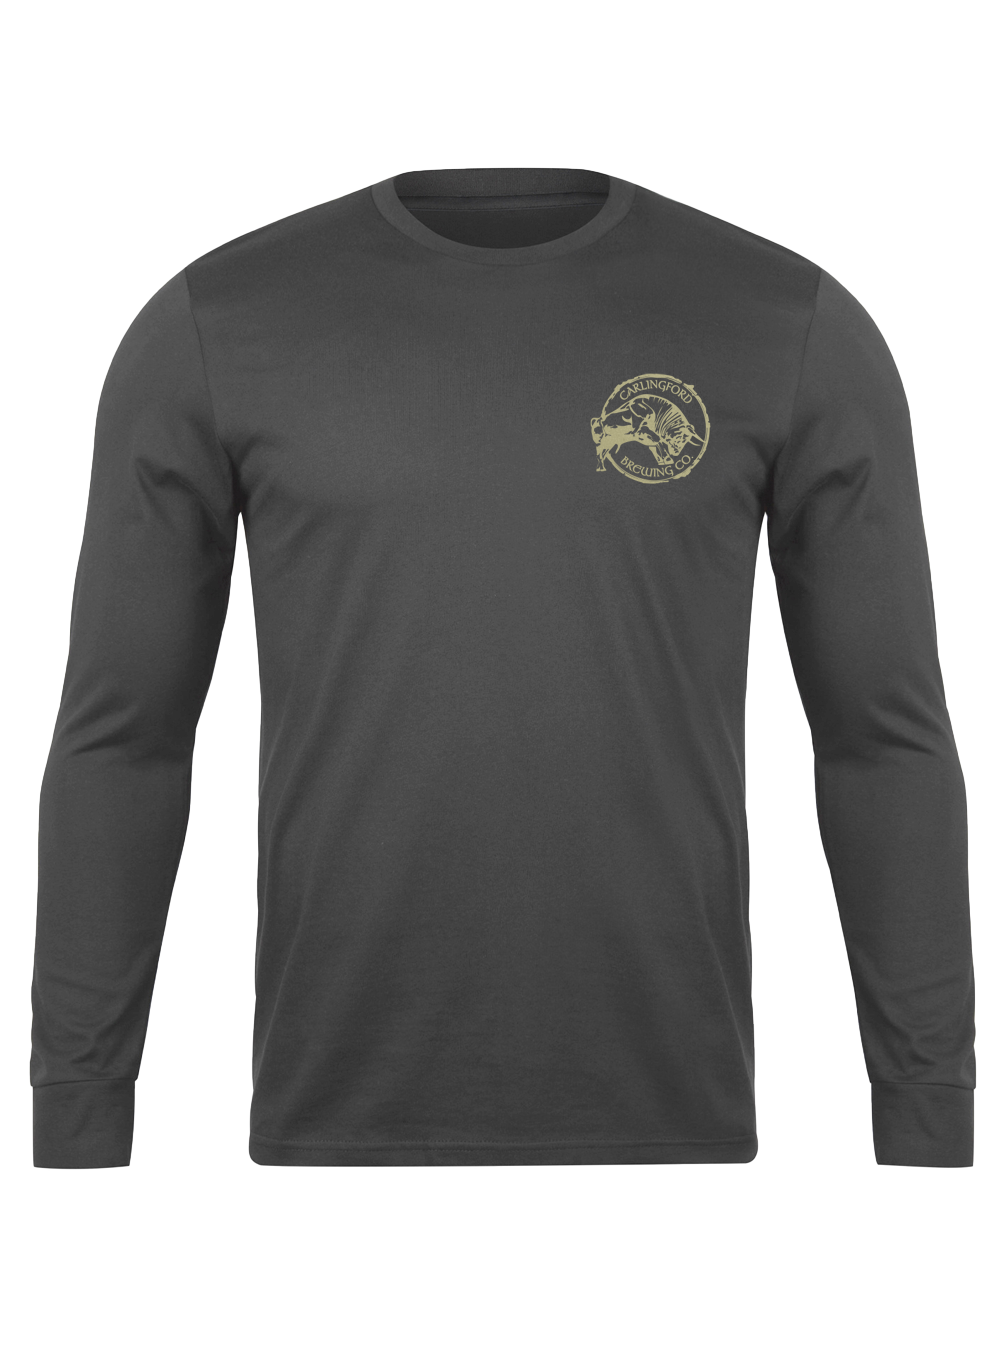 Long Sleeve T-shirt (Graphite) – Carlingford Brewing Co.